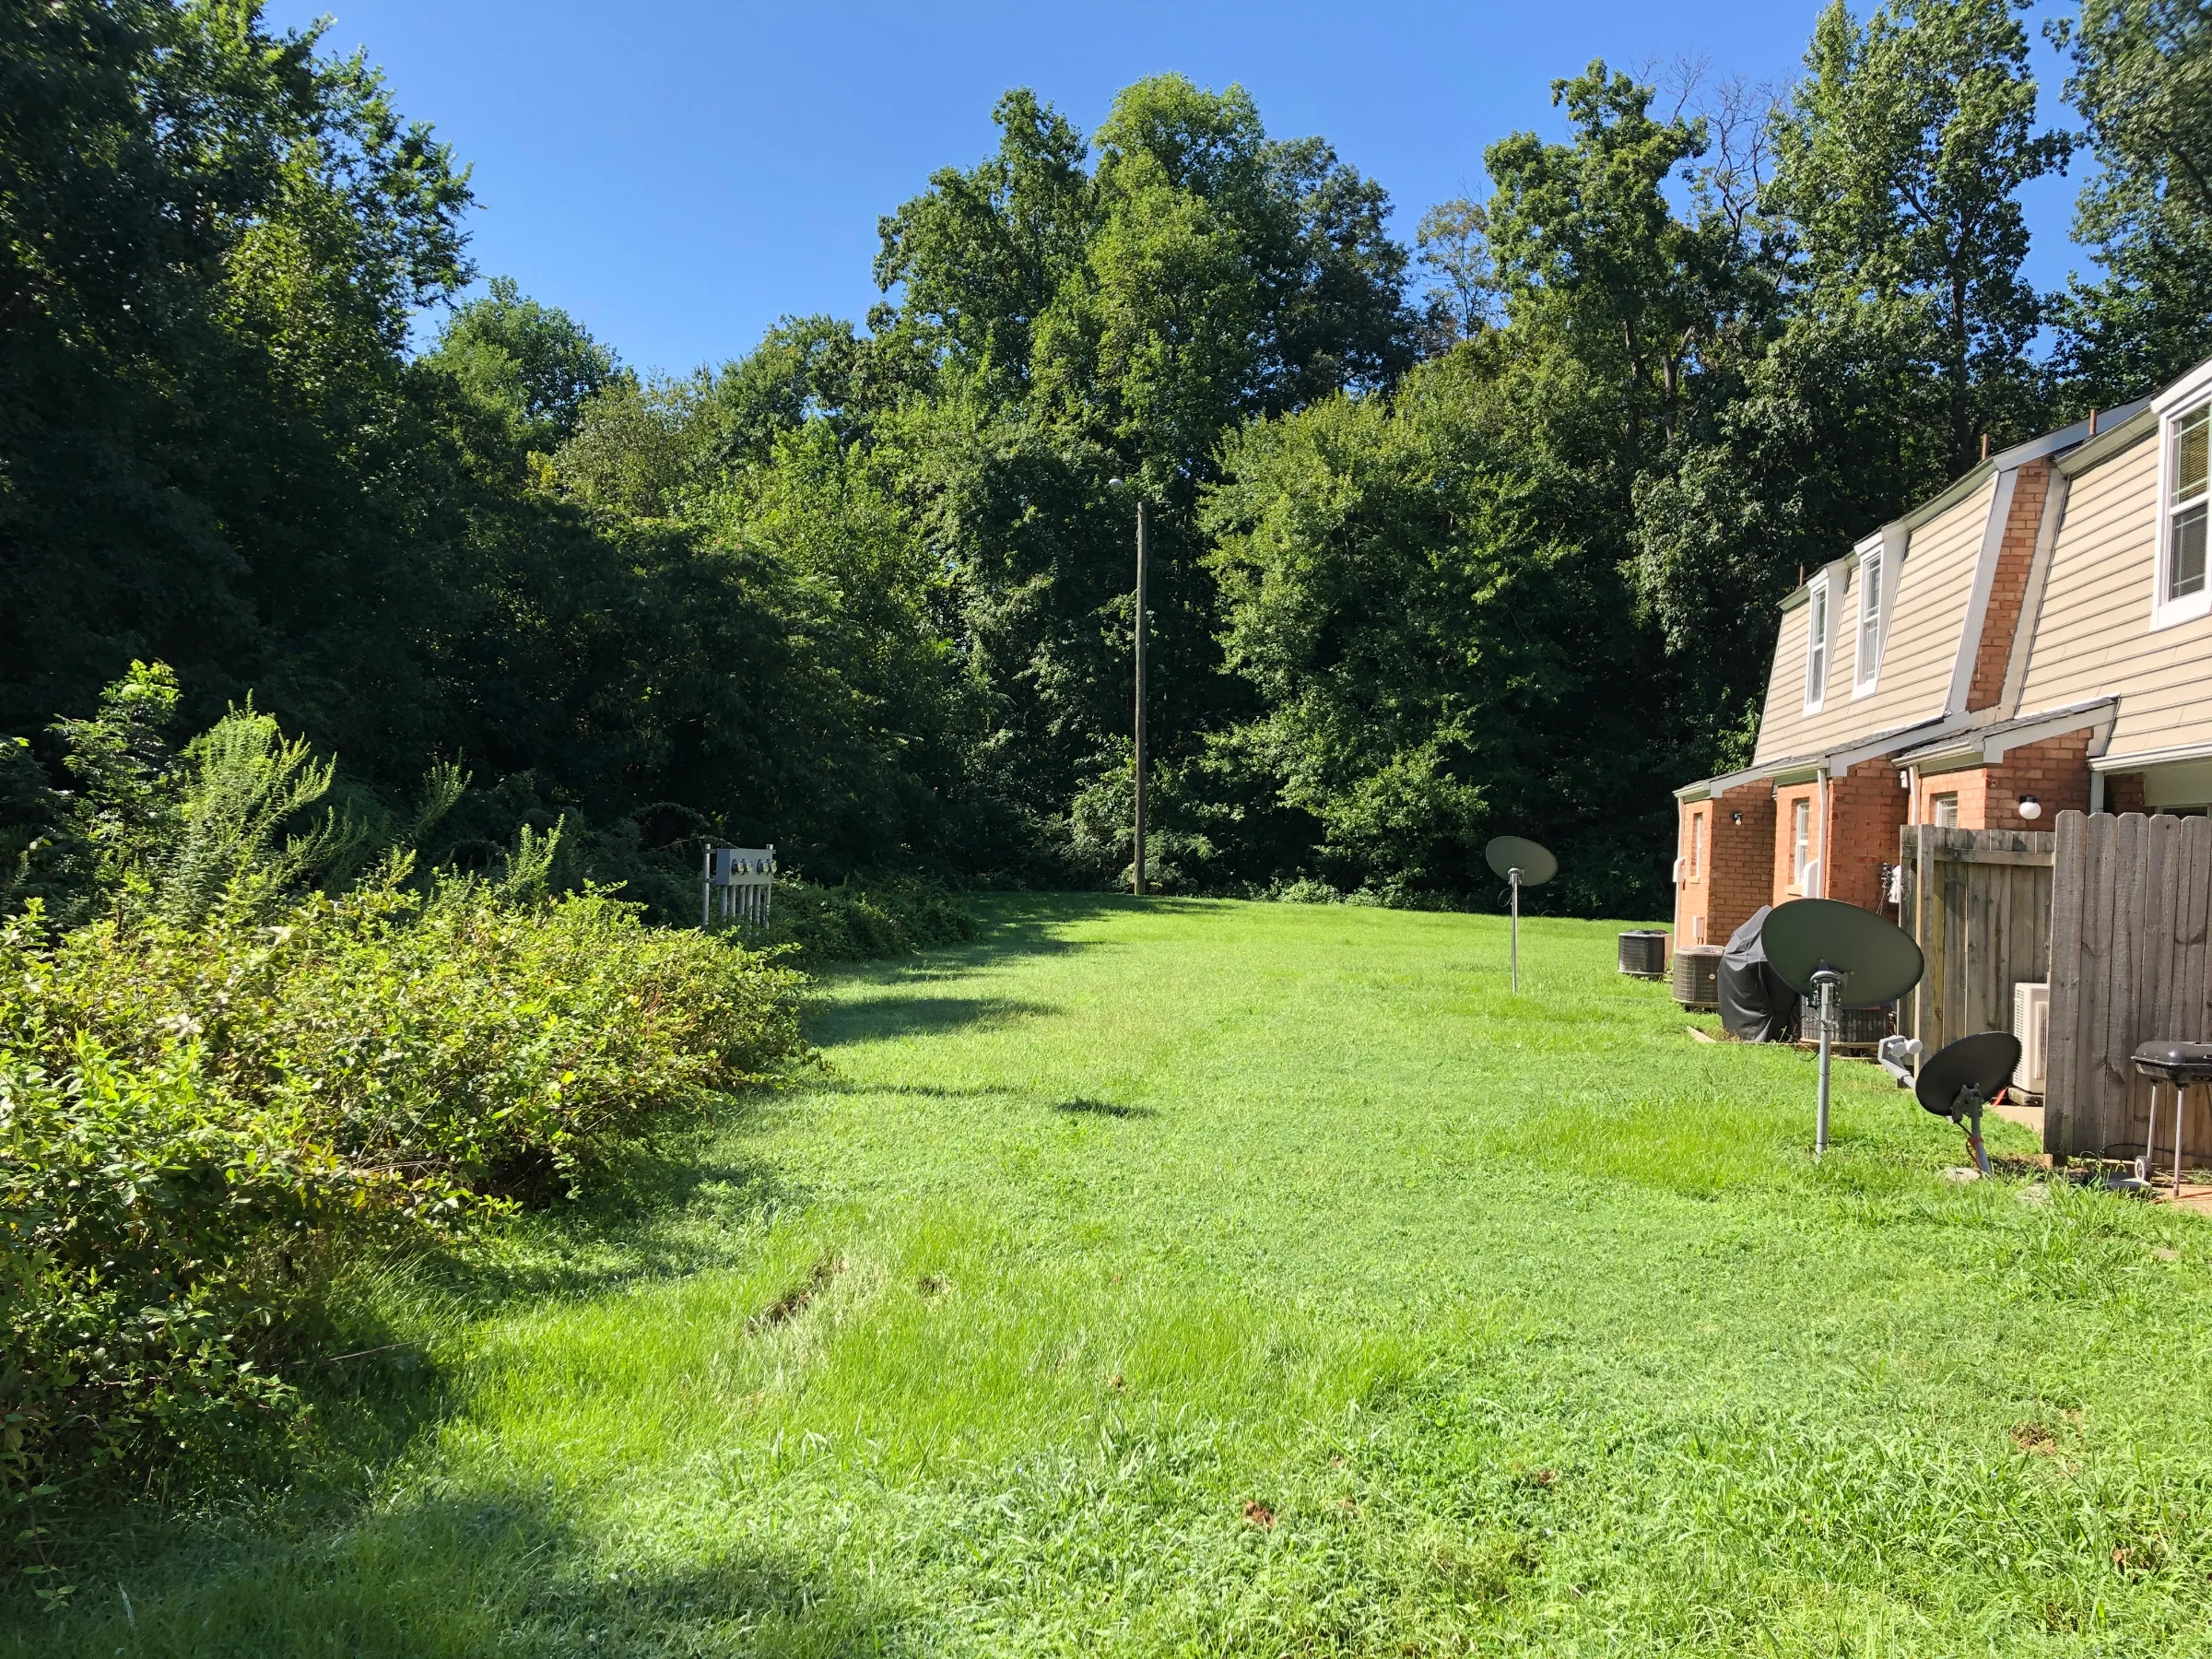 A neighborhood backs up against a 13-acre property in August 2020 that is now being converted into a public park in the Southside area of Richmond, Virginia. Parker C. Agelasto/Handout via Thomson Reuters Foundation